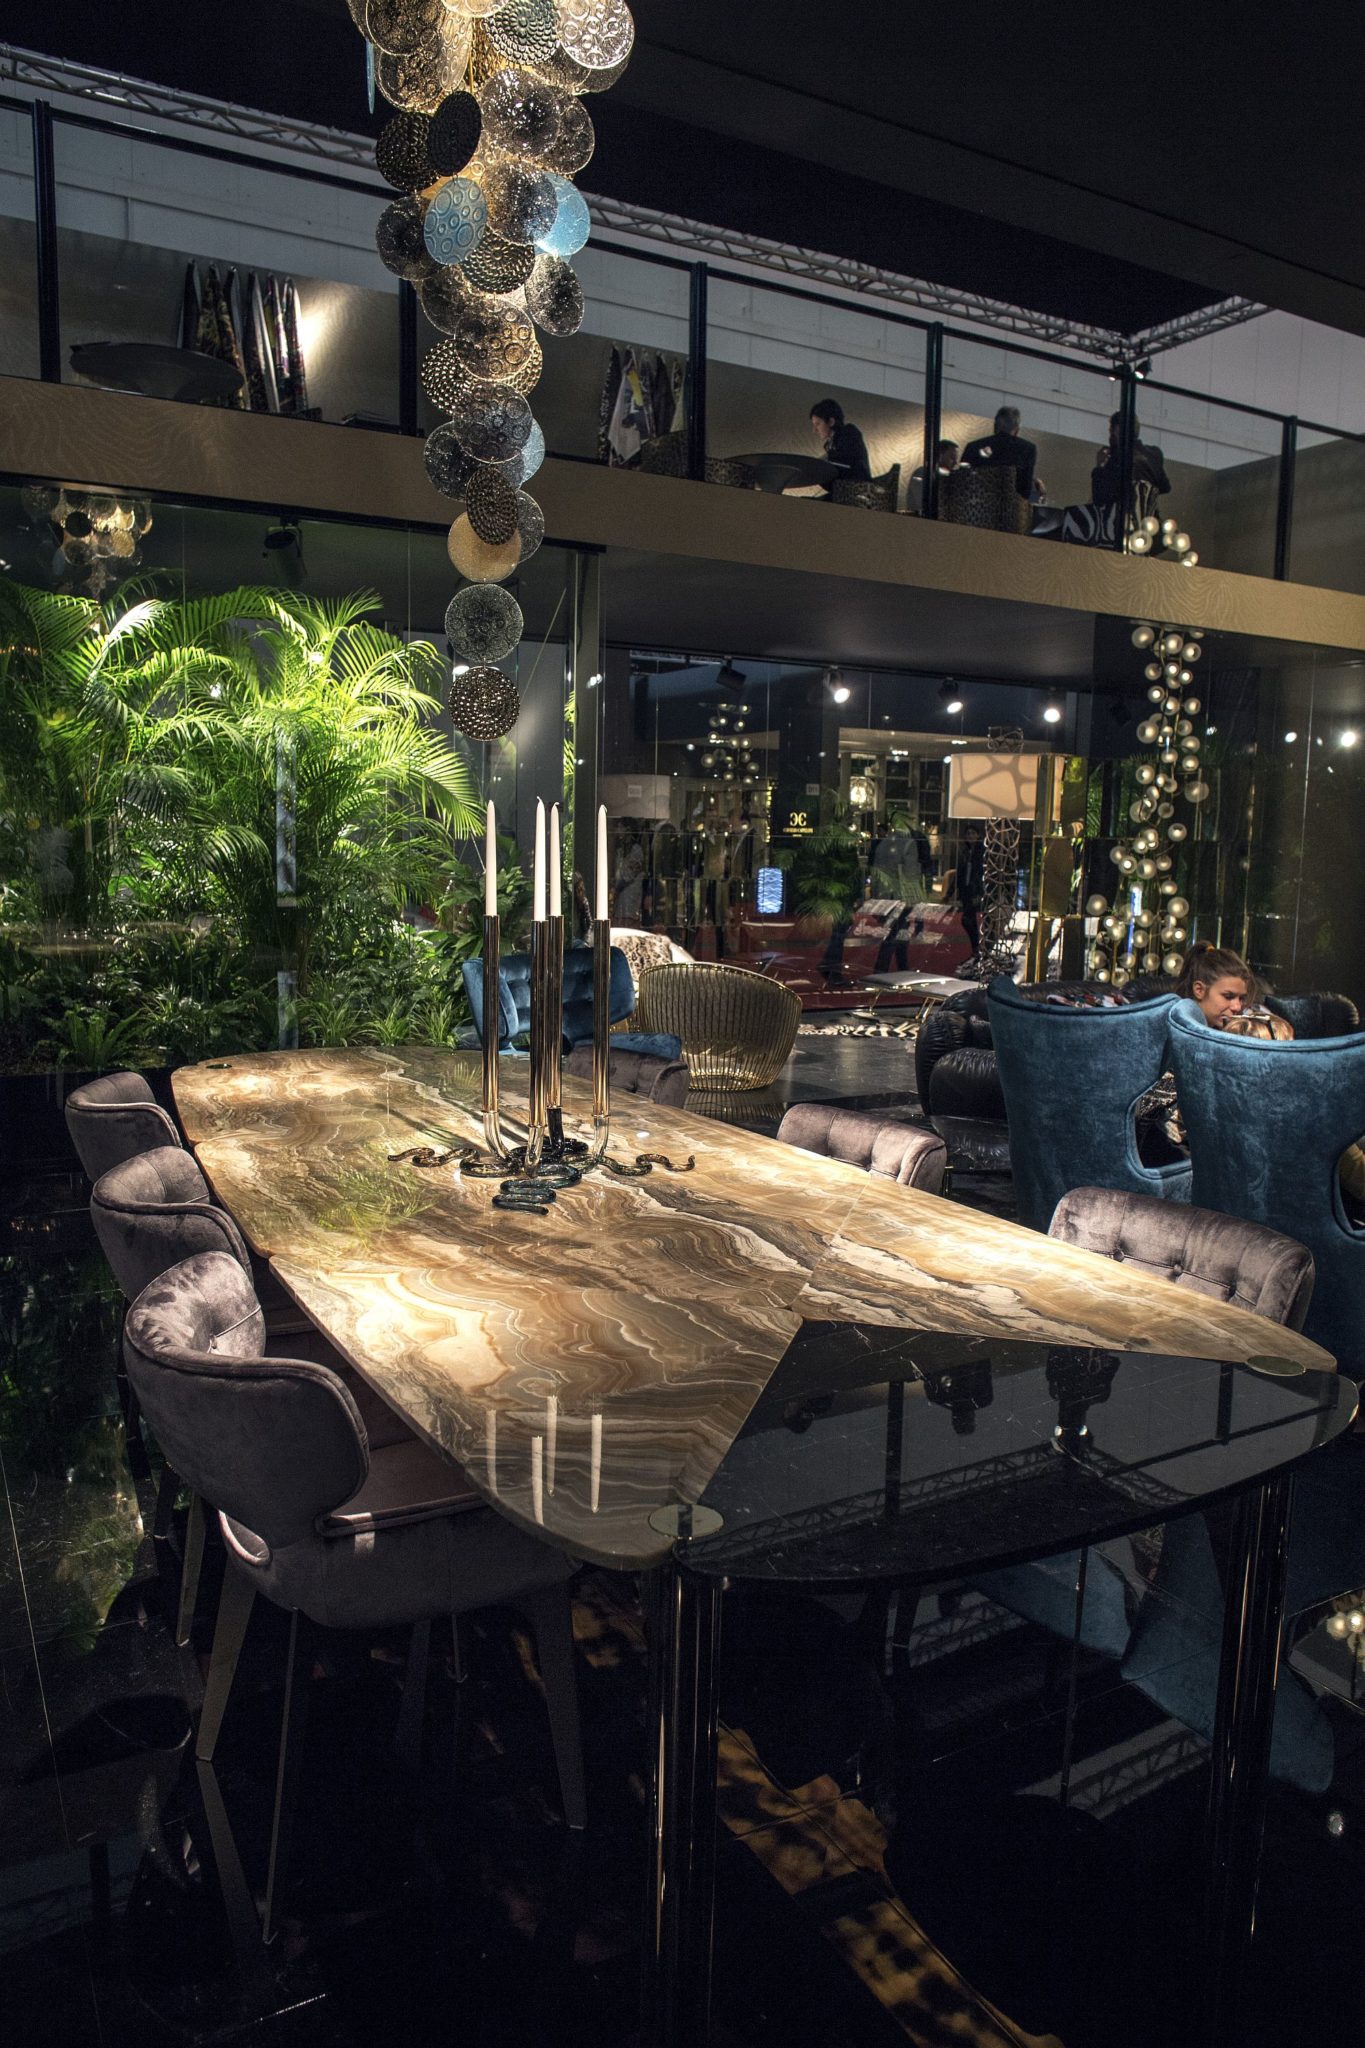 Luxury classic furniture for the dining room from Roberto Cavalli